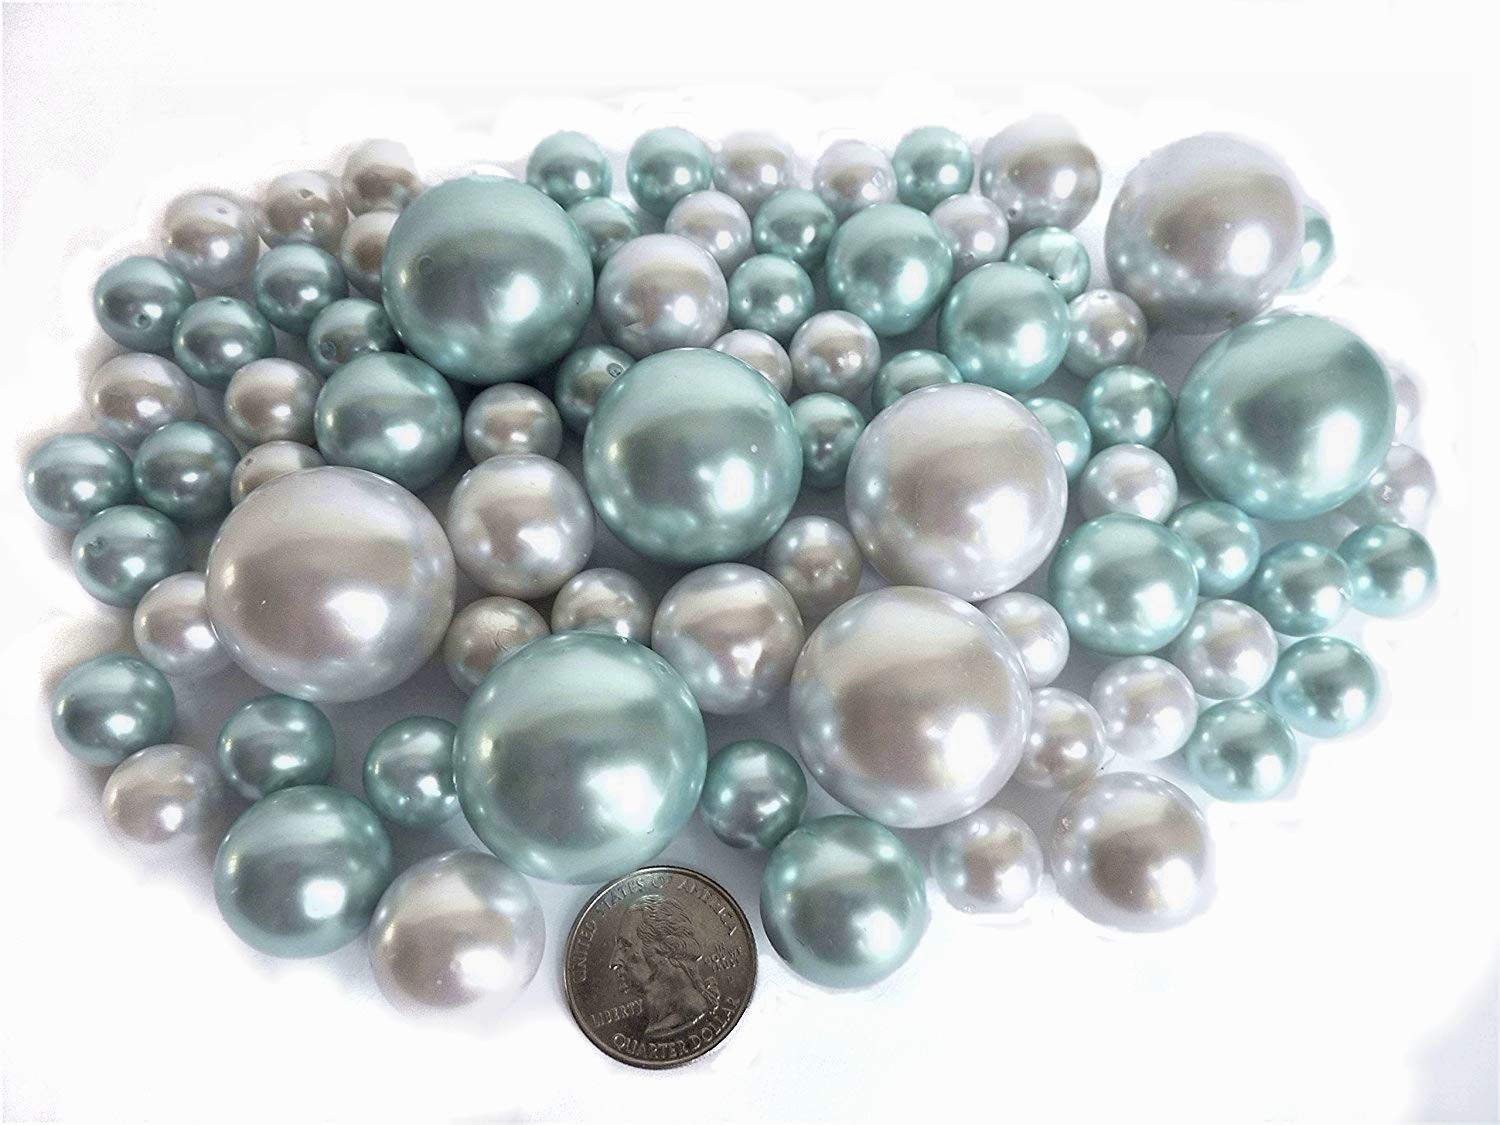 13 Cute Pearl Vase Fillers 2024 free download pearl vase fillers of ashland decorative fillers large tiffany blue www topsimages com for light baby blue and white pearls jumbo and assorted jpg 1500x1125 ashland decorative fillers large 